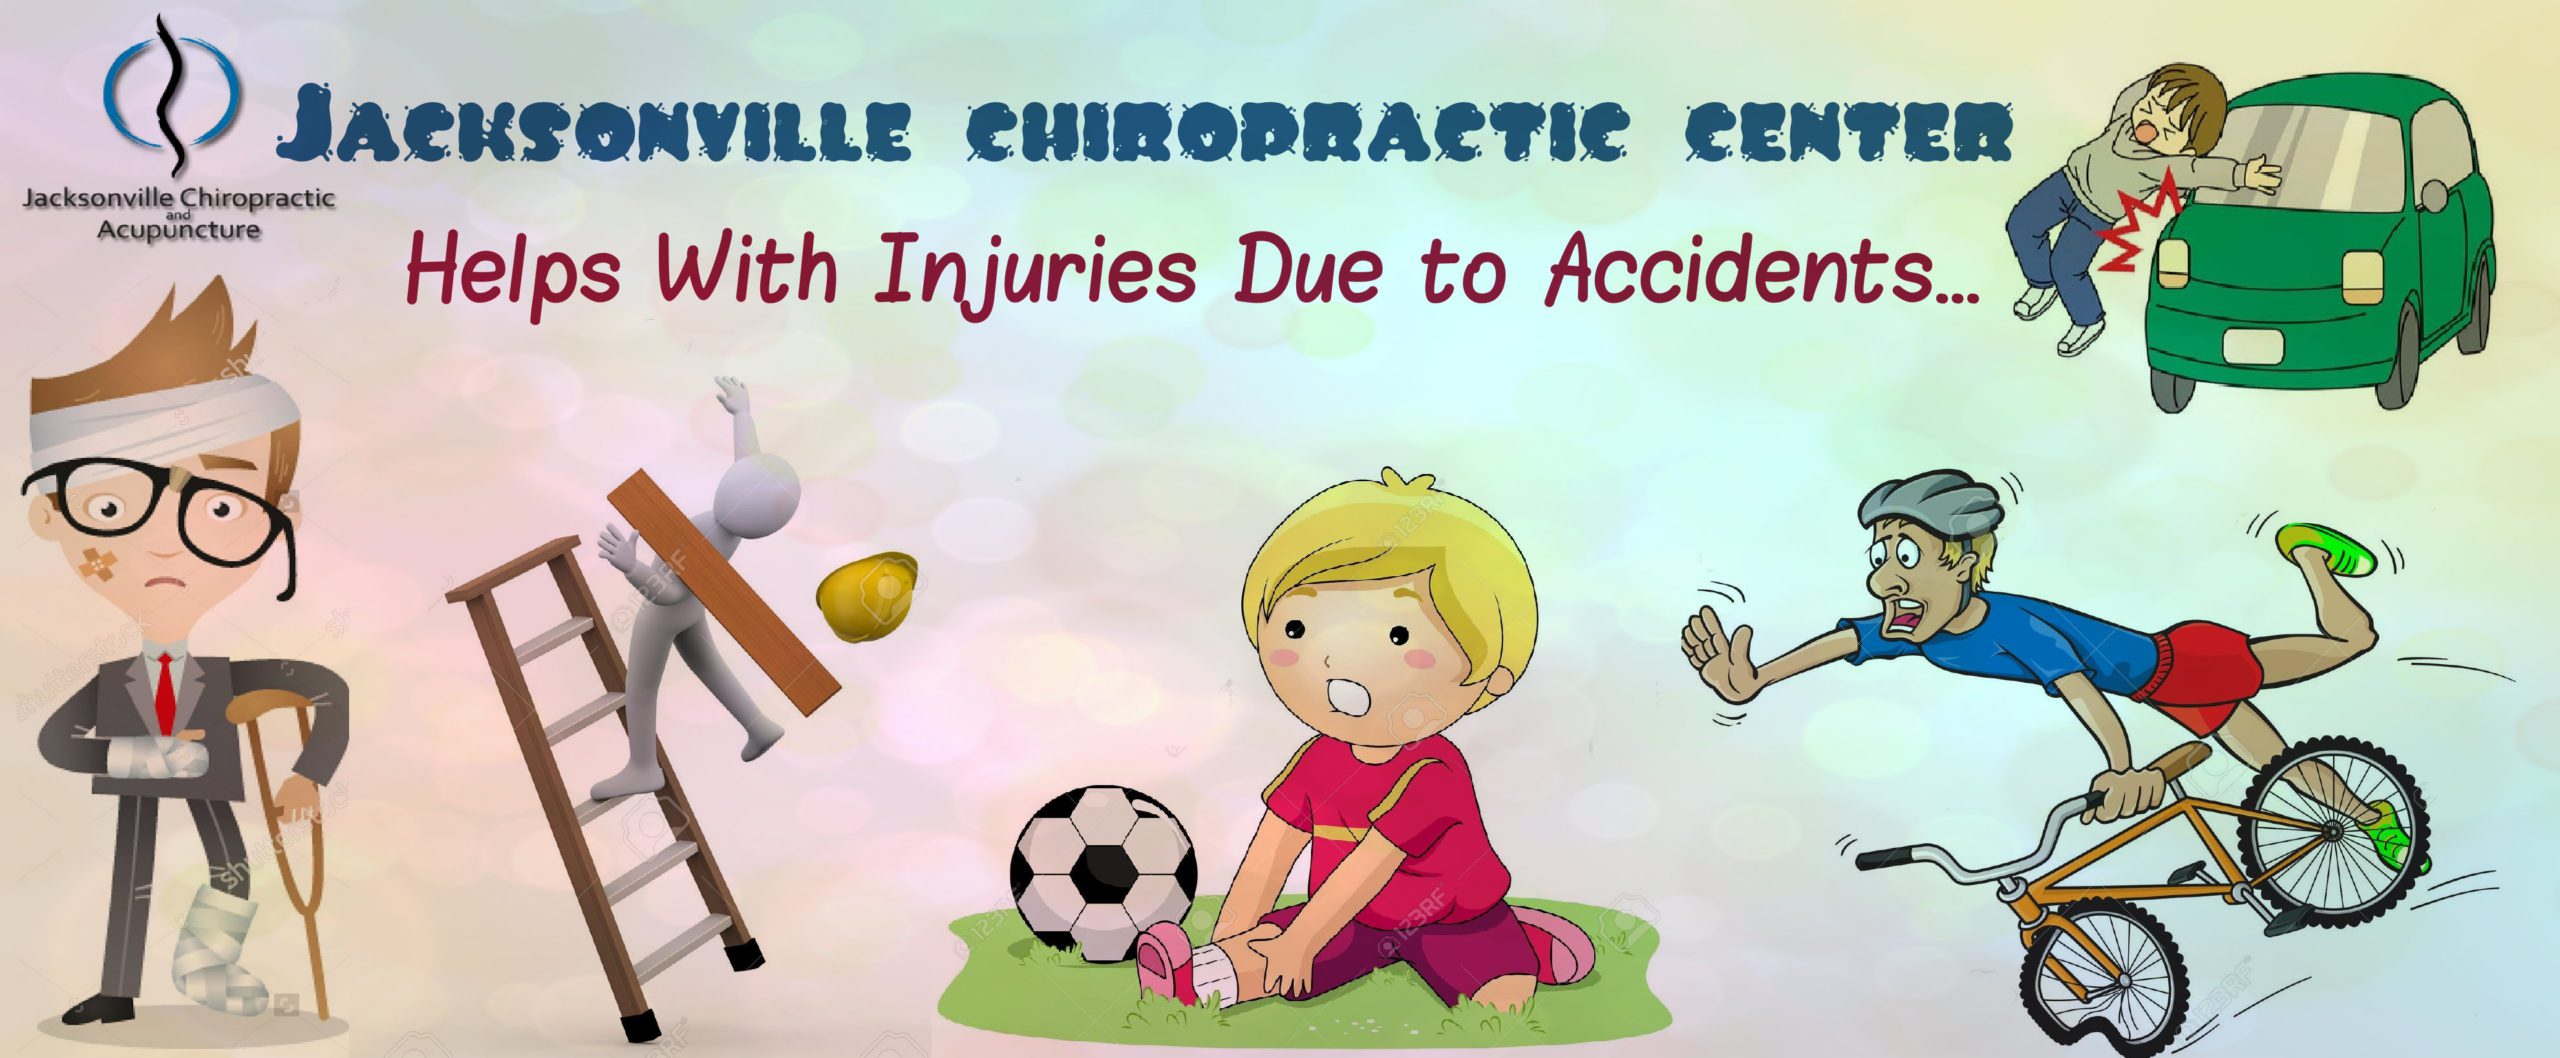 Jacksonville-chiropractic-center-Helps-With-Injuries-Due-to-Accidents